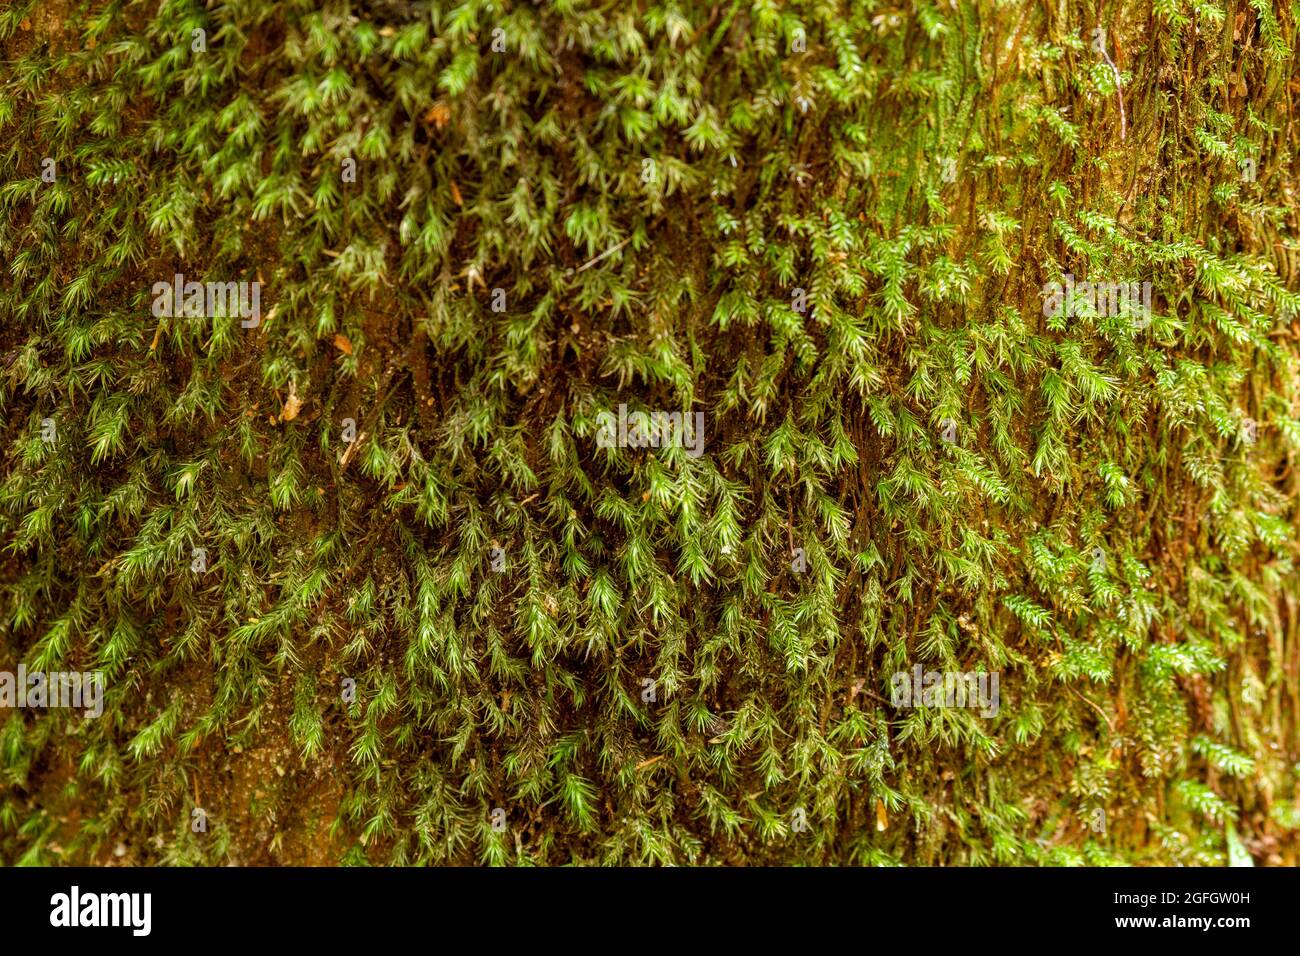 Moss growing on tree trunk in sub-tropical rainforest. Stock Photo